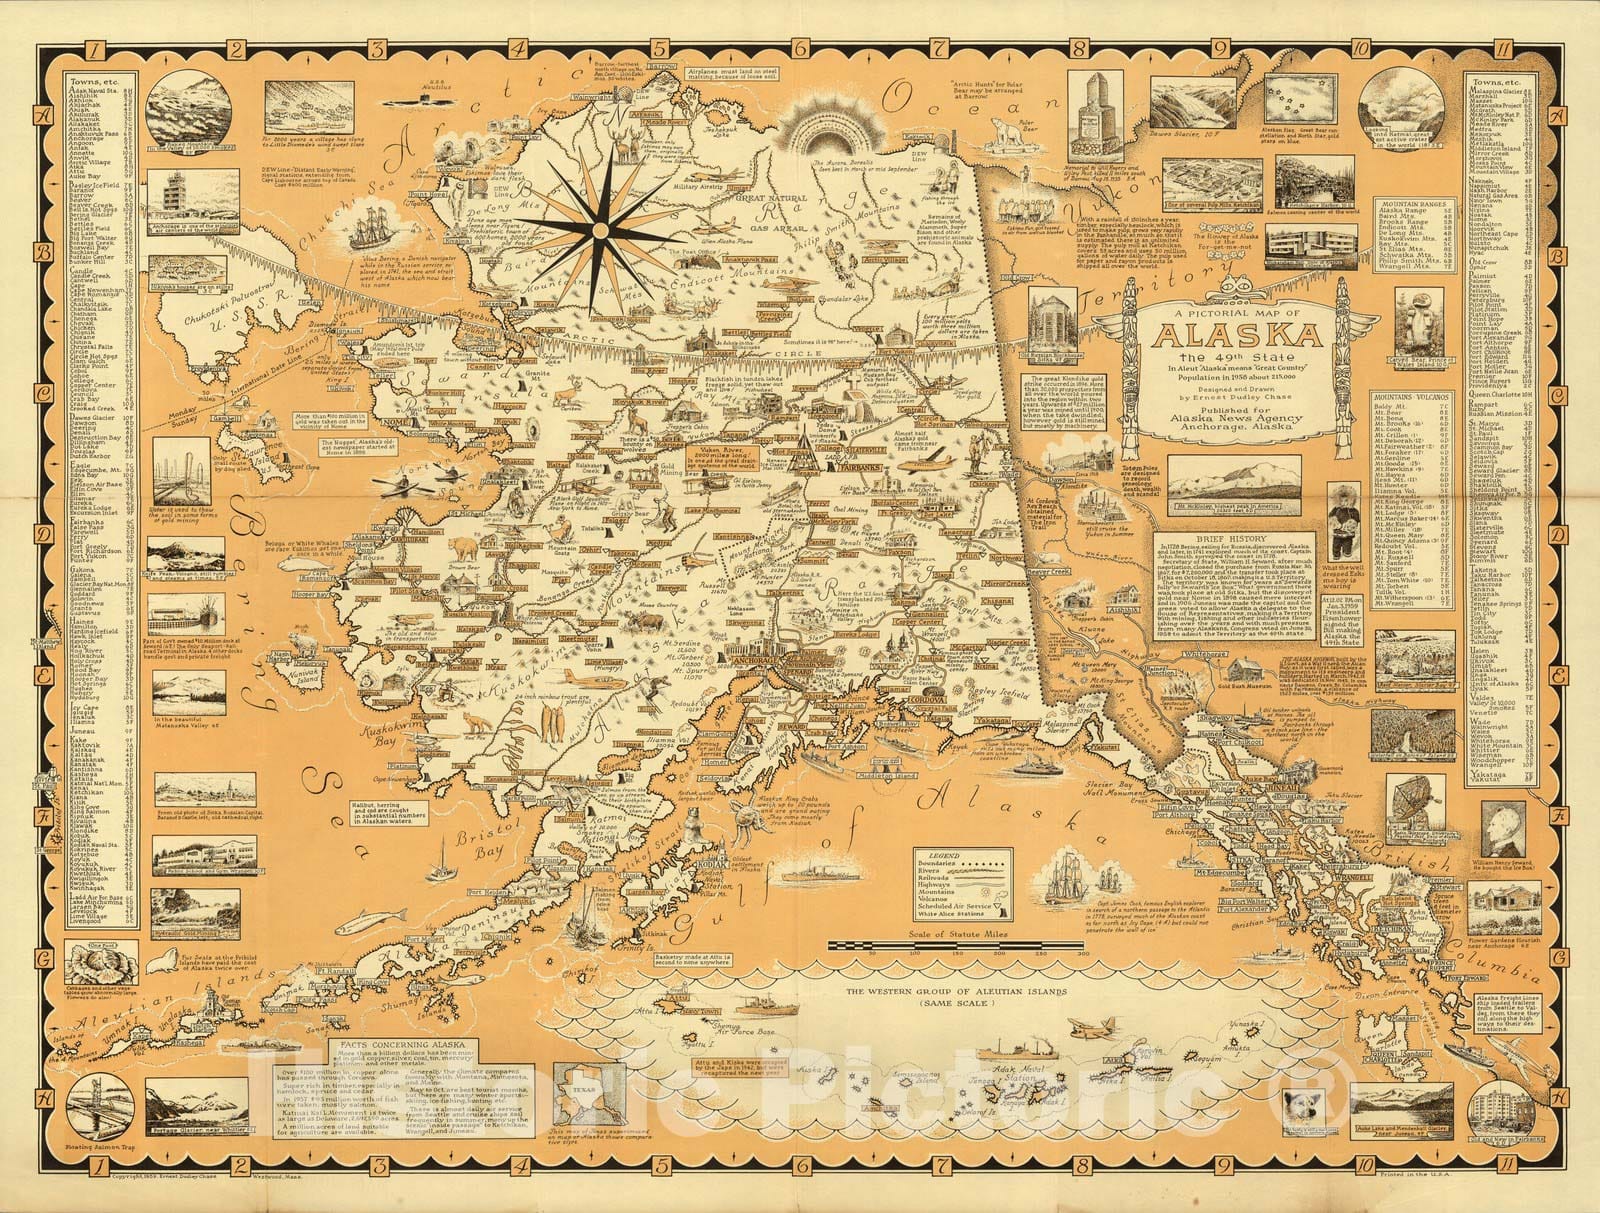 Historic Map : Pictorial Map of Alaska, the 49th State, 1959 - Vintage Wall Art